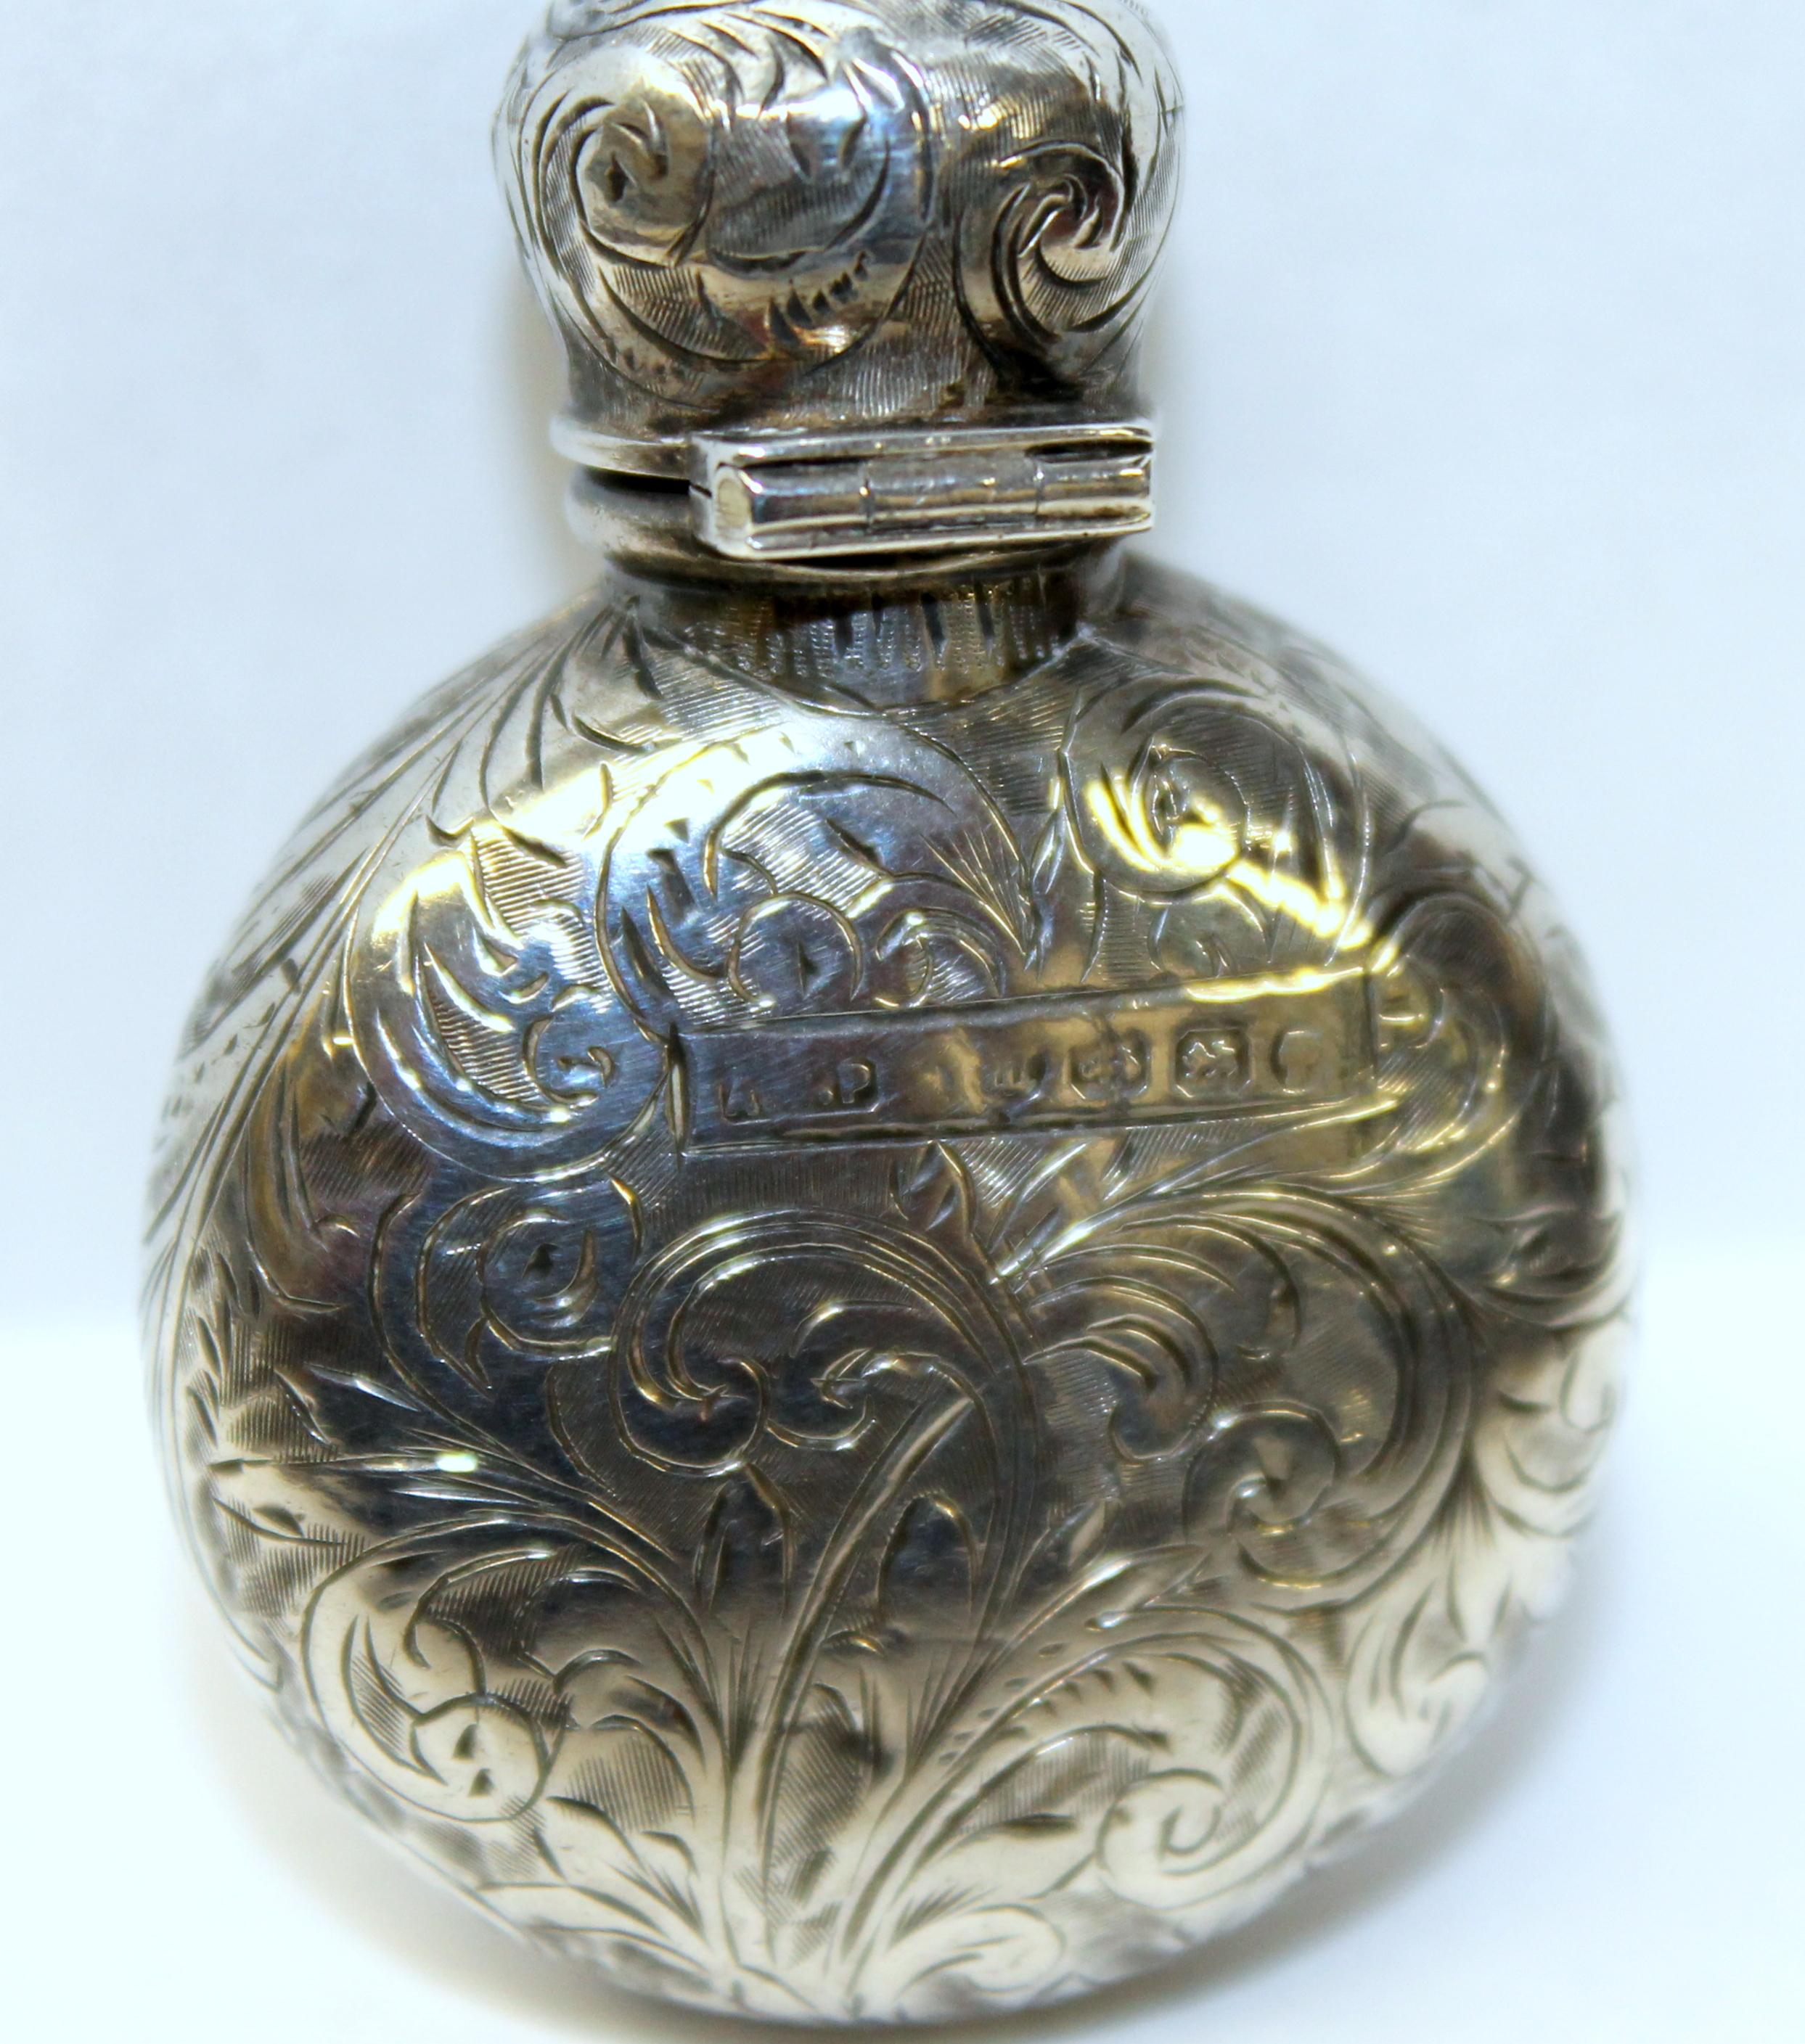 19th Century Antique English Victorian Hallmarked Sterling Silver Scent/Perfume Bottle